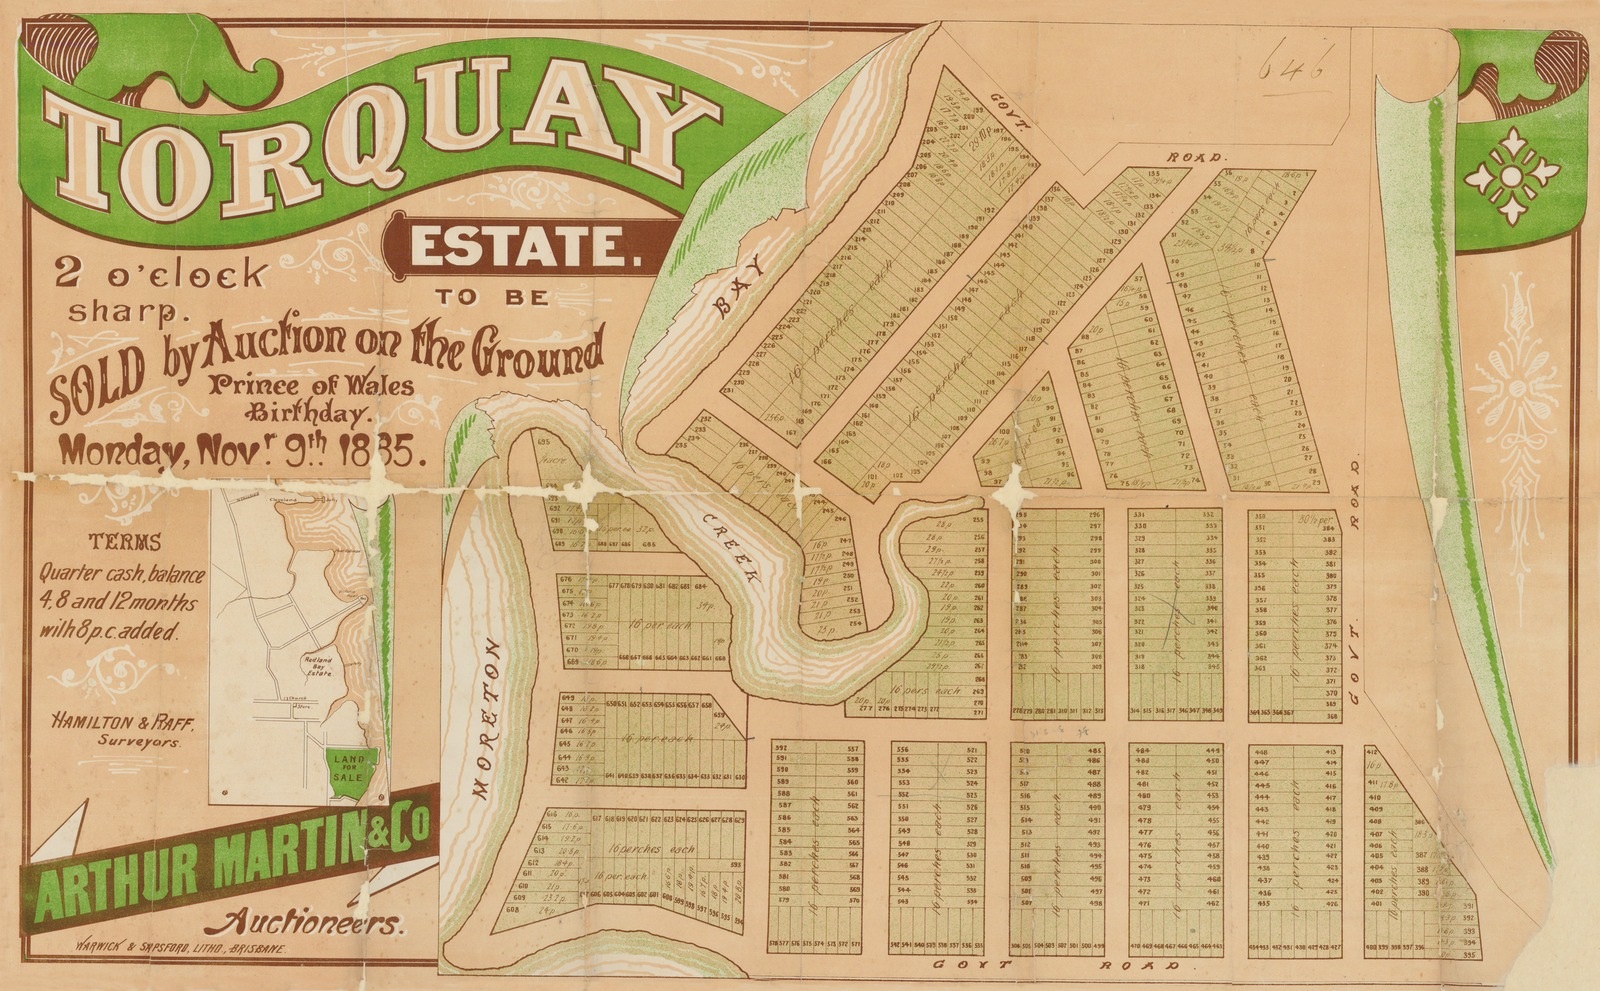 Torquay Estate in Redland Bay was to be sold by auction on 9 November 1885. 